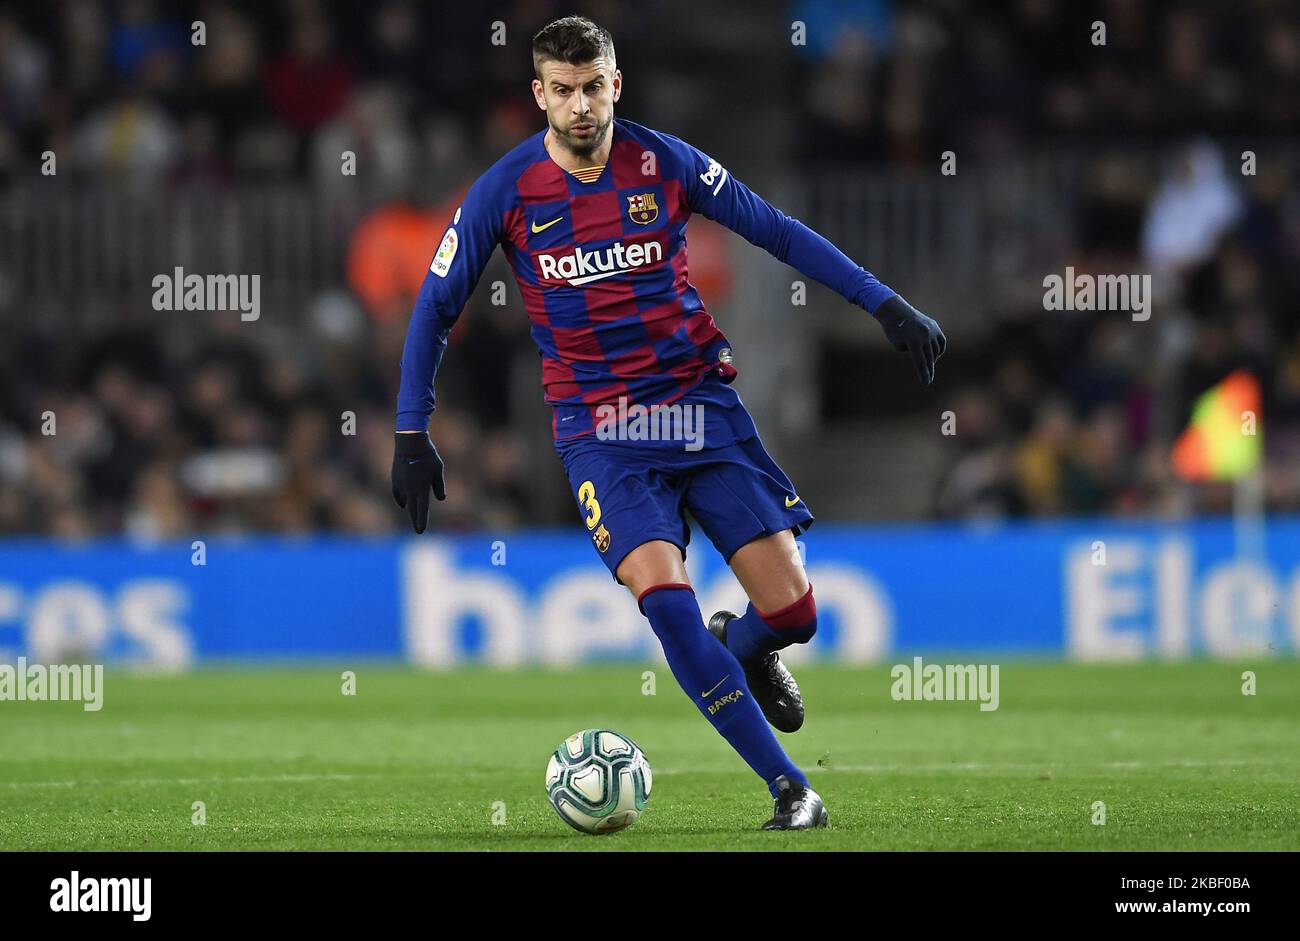 Gerard Pique during the match between FC Barcelona and Granada CF, corresponding to the week 20 of the Liga Santander, played at the Camp Nou Stadium, on 20th January 2020, in Barcelona, Spain. (Photo by Rosdemora/Urbanandsport /NurPhoto) Stock Photo